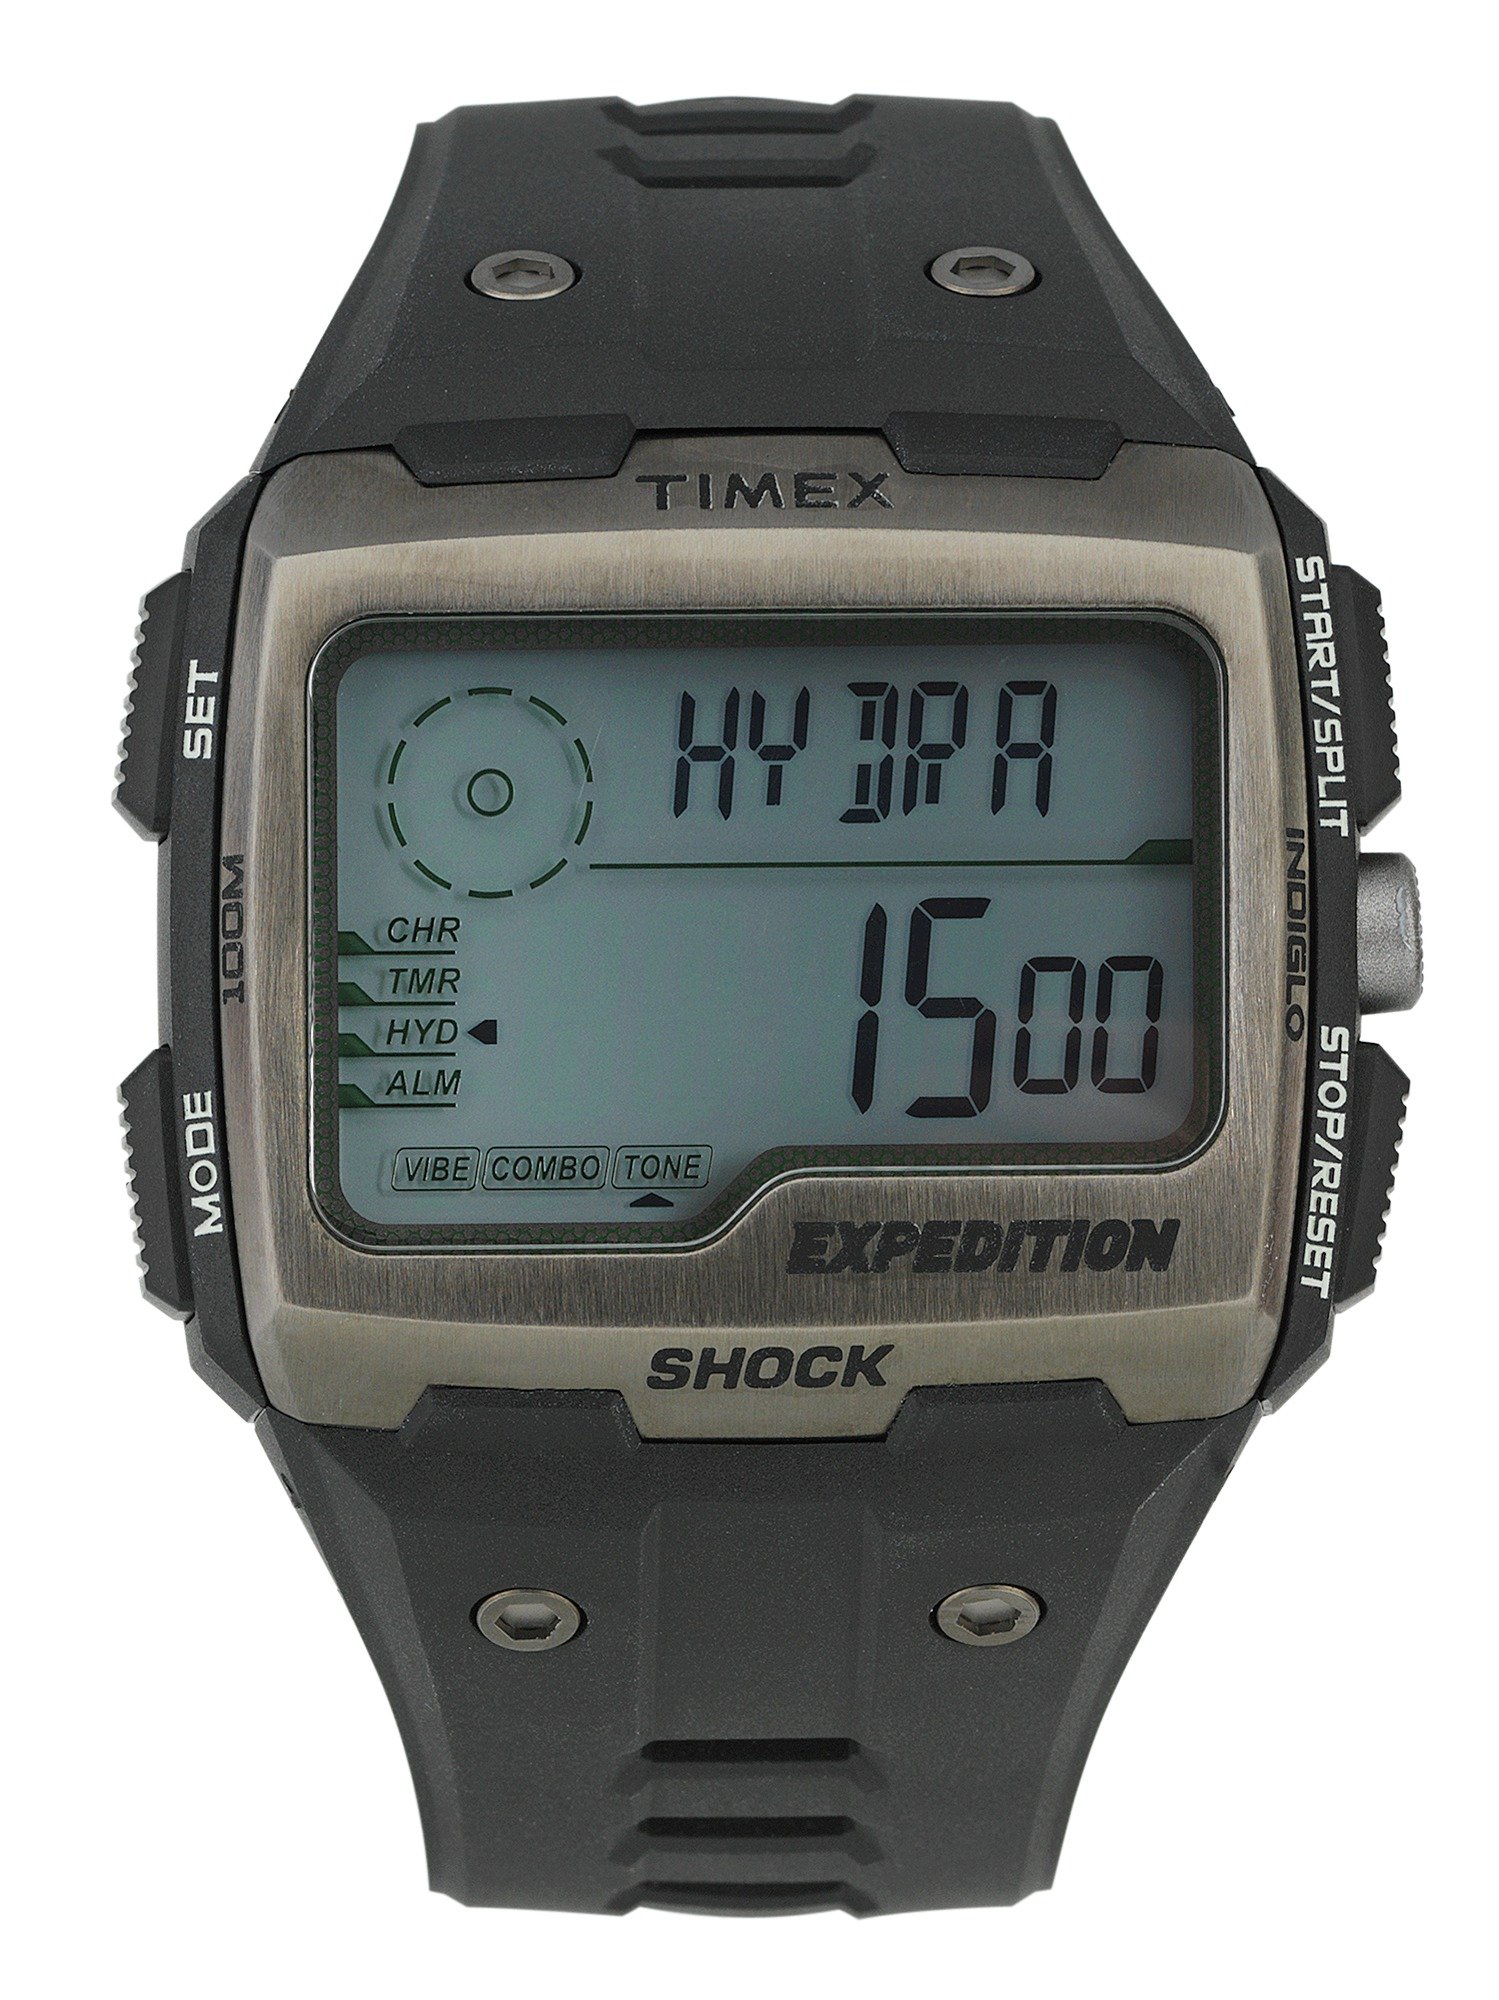 Timex review